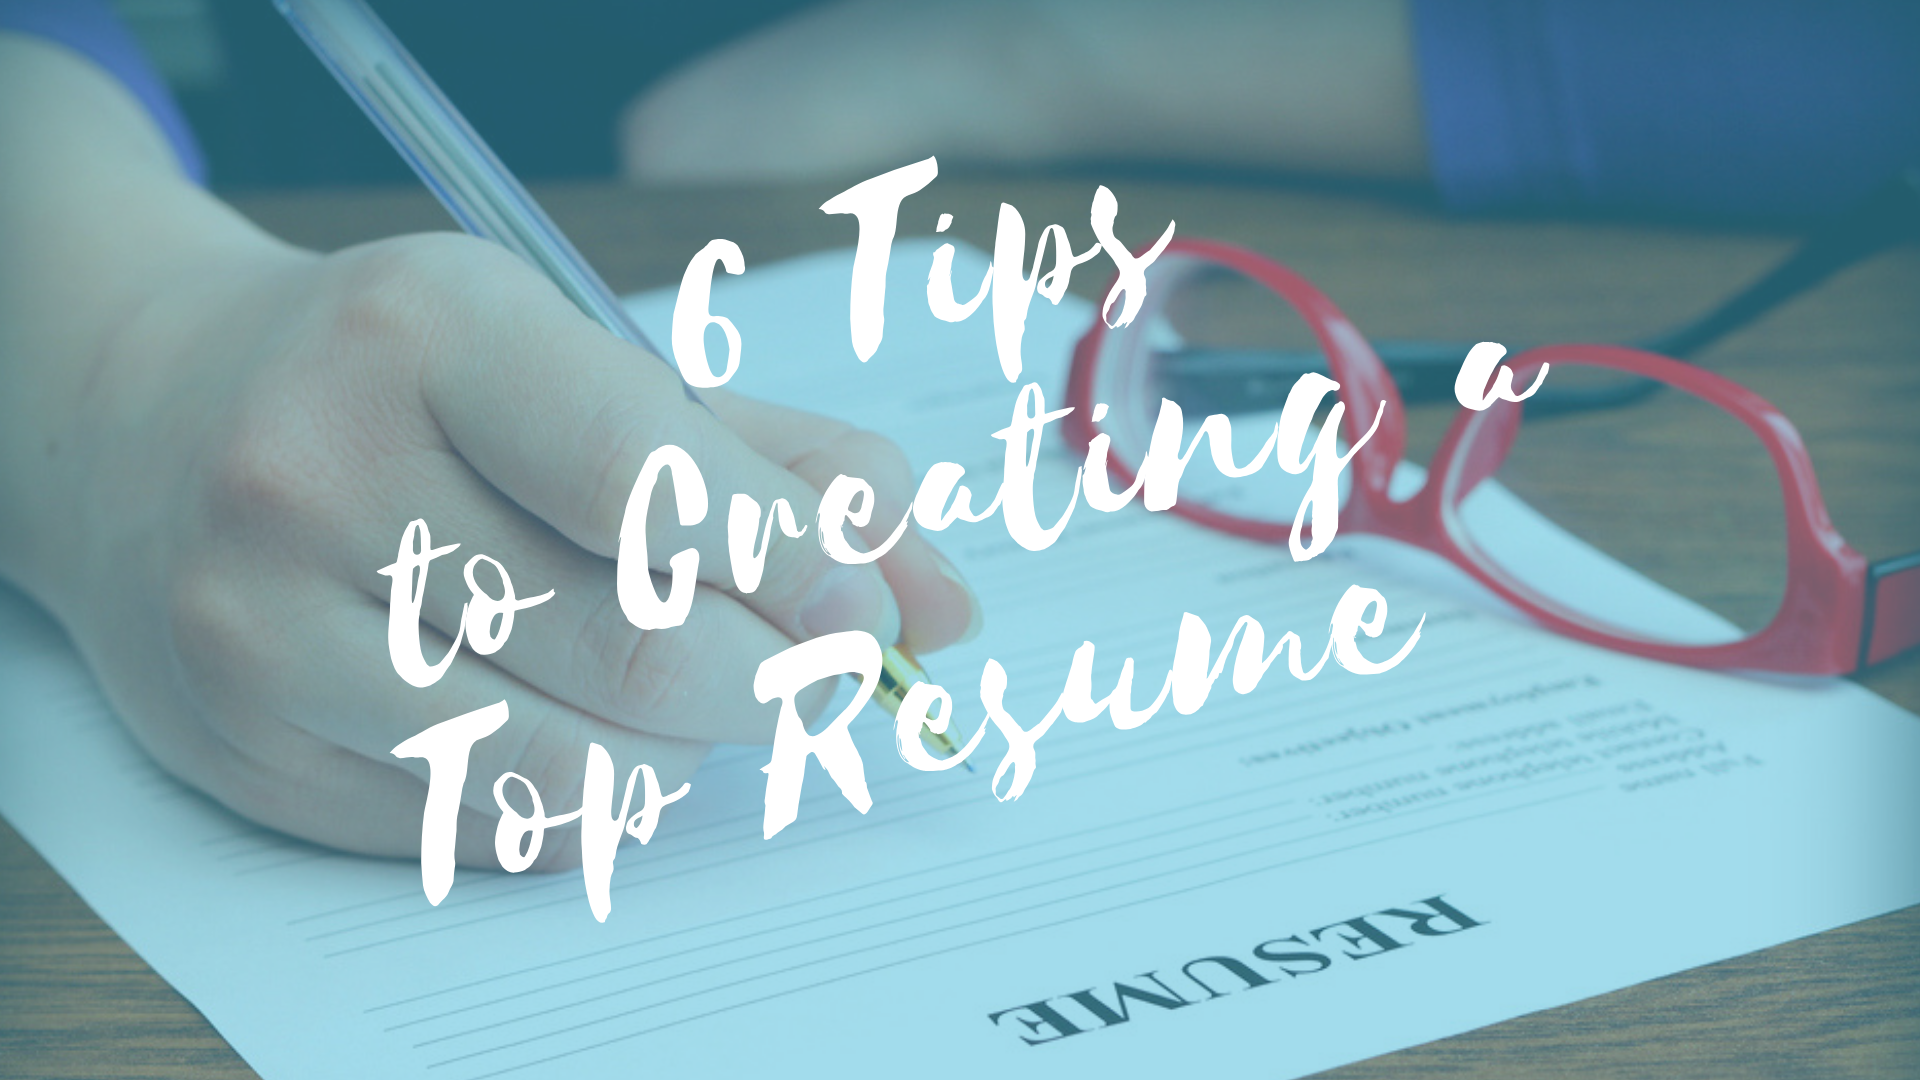 6 Tips to Creating a Top Resume